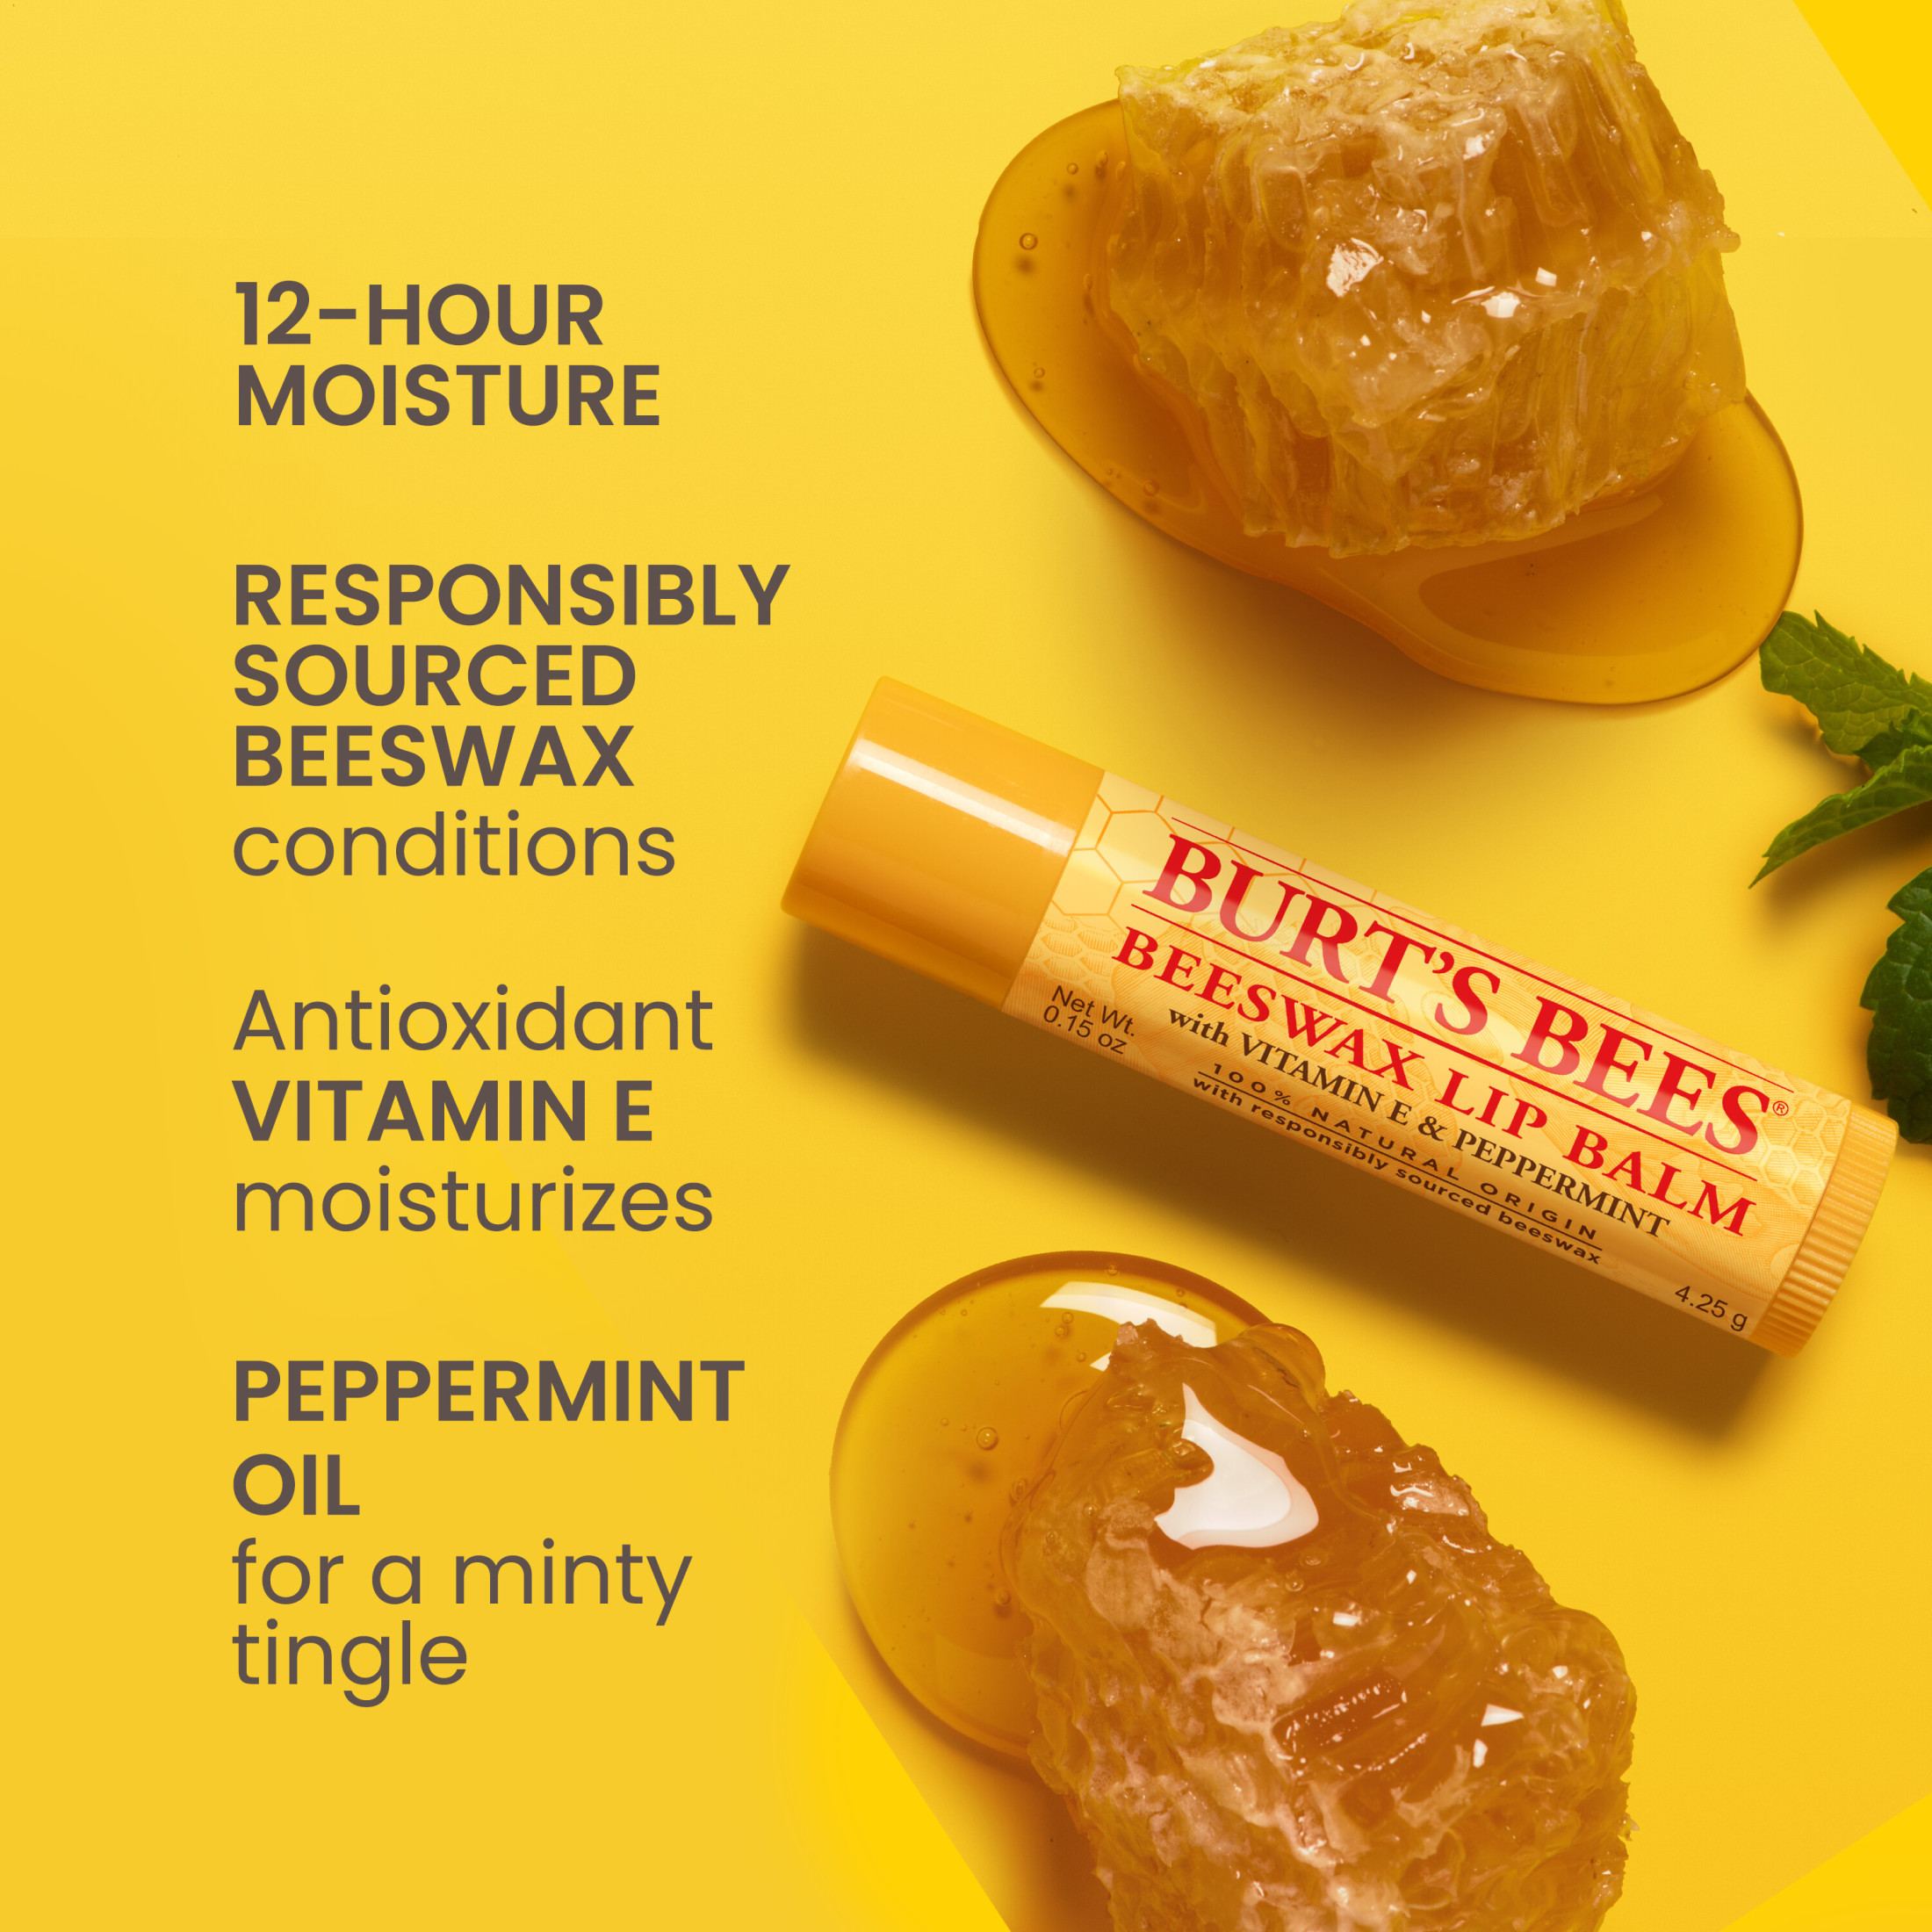 Burt's Bees 100% Natural Origin Moisturizing Lip Balm, with Beeswax, Vitamin E & Peppermint Oil, 3 Tubes - image 3 of 16